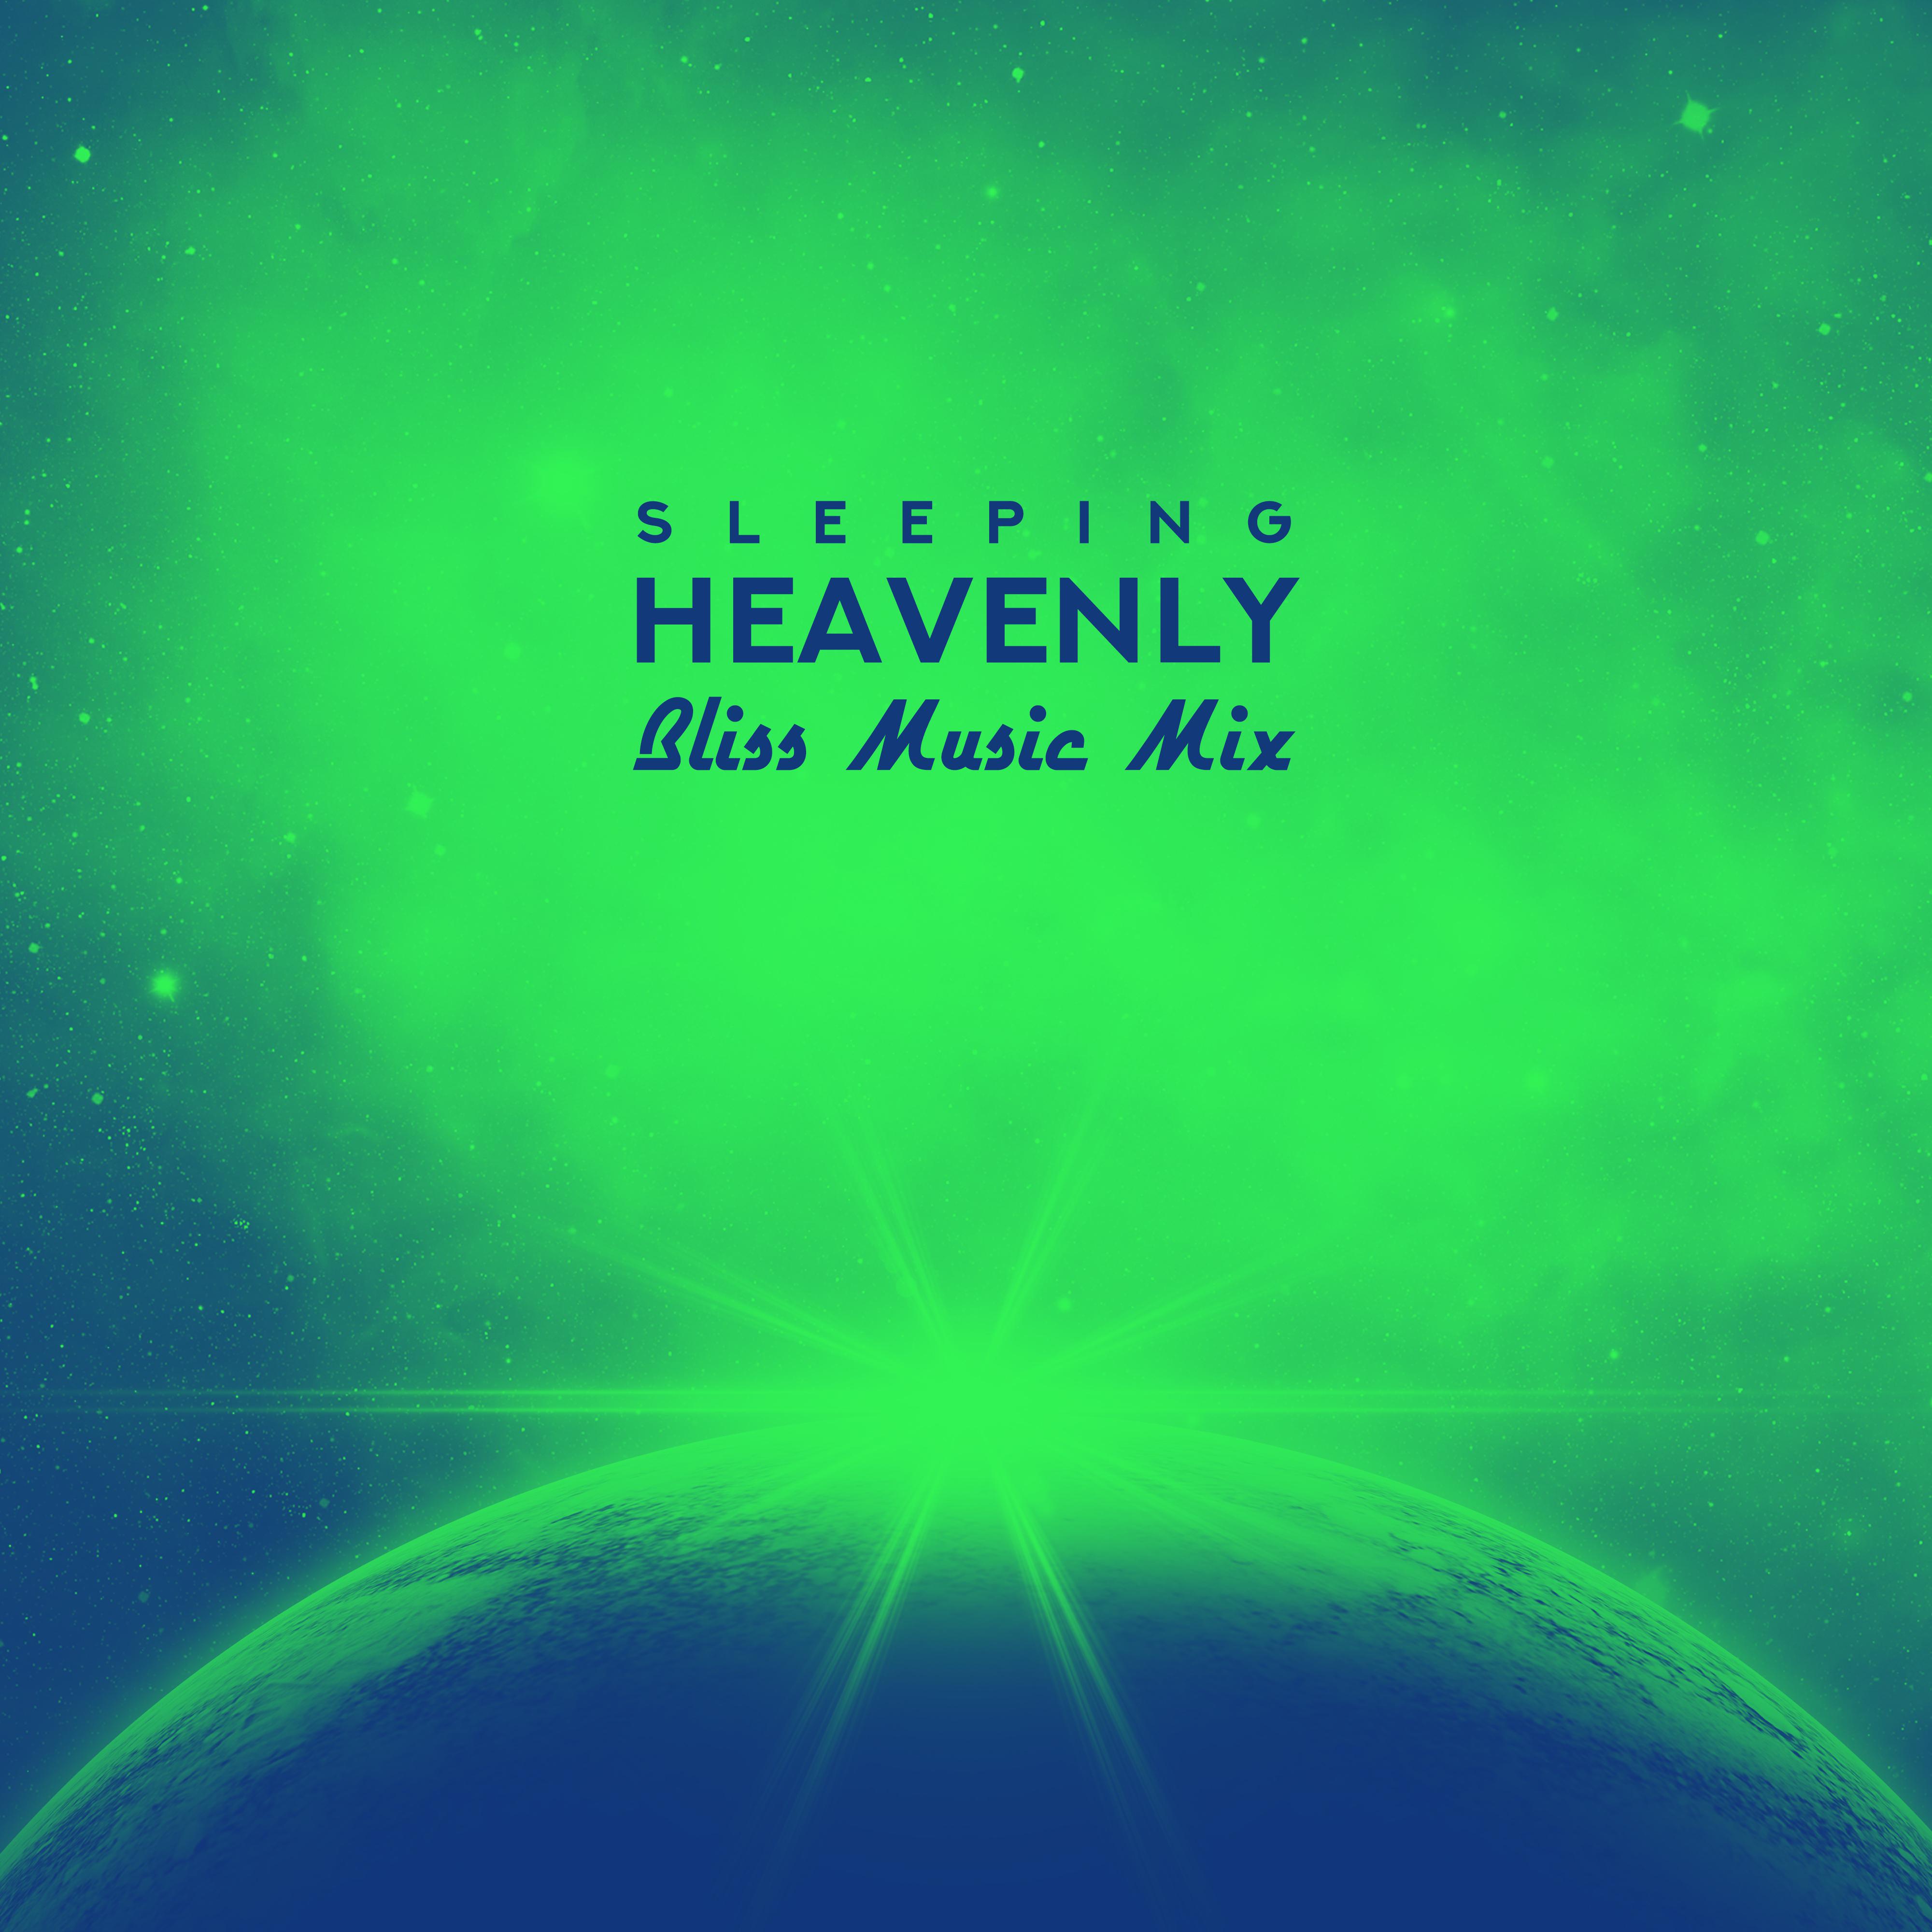 Sleeping Heavenly Bliss Music Mix: 2019 New Age Natue Music Compilation for Calm Sleep, Pure Relaxation, Stress Relief, Rest & Wake Up Full of Energy in the Morning